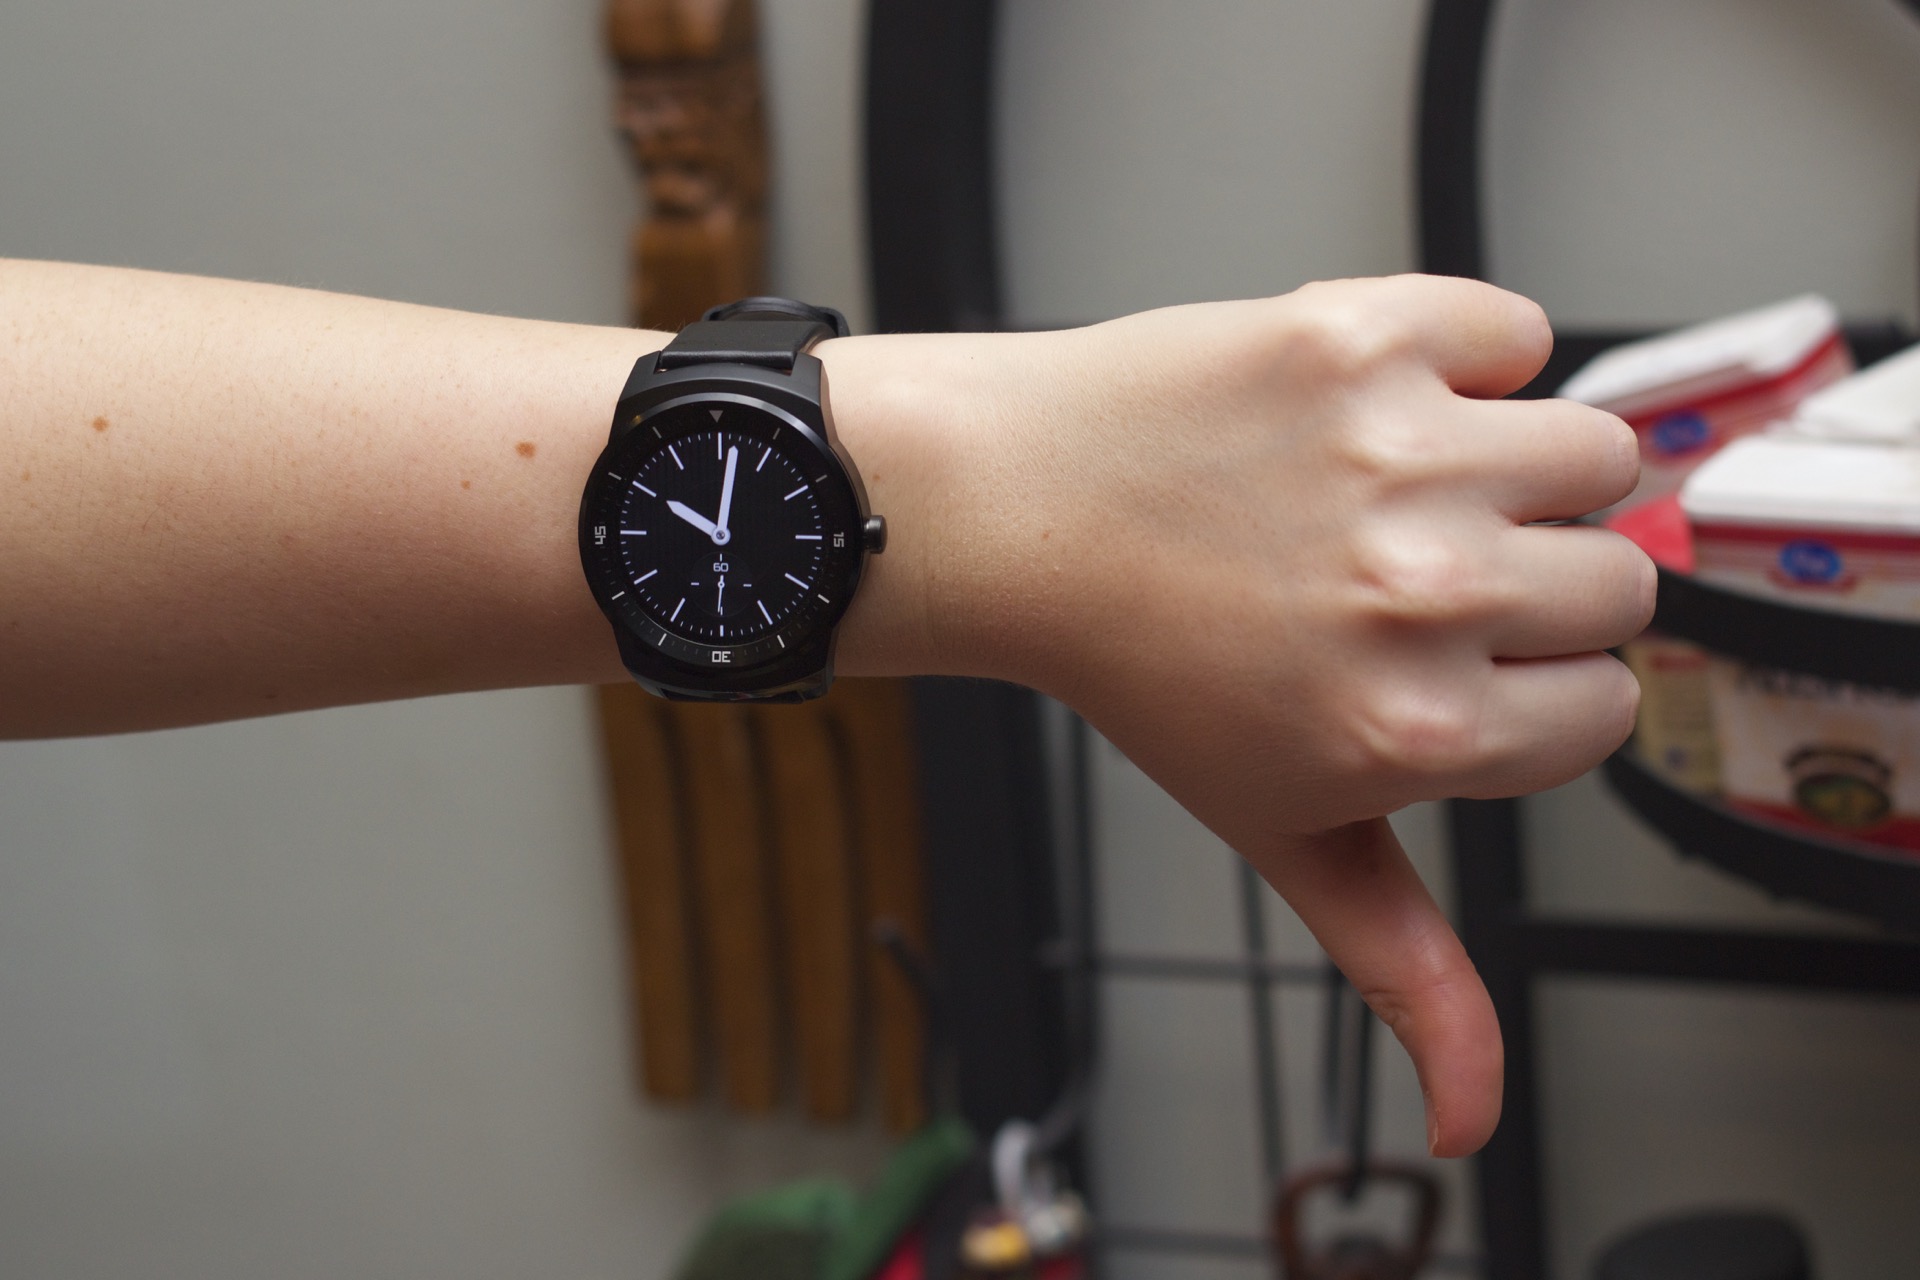 Signs of progress: One month with Android Wear 5.0 | Ars Technica